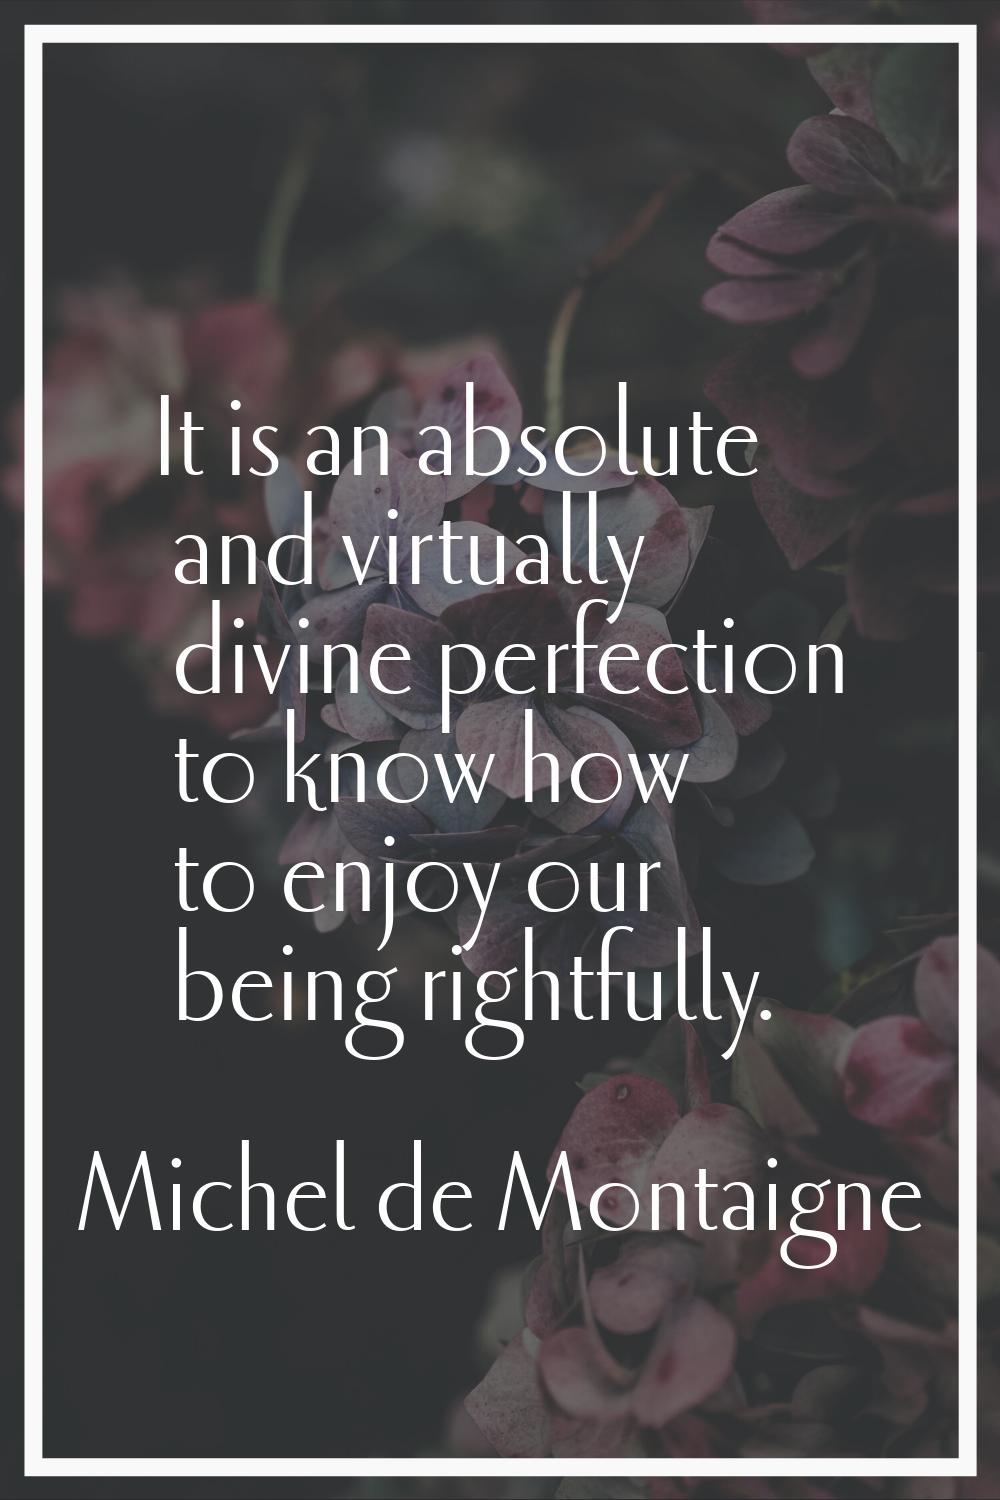 It is an absolute and virtually divine perfection to know how to enjoy our being rightfully.